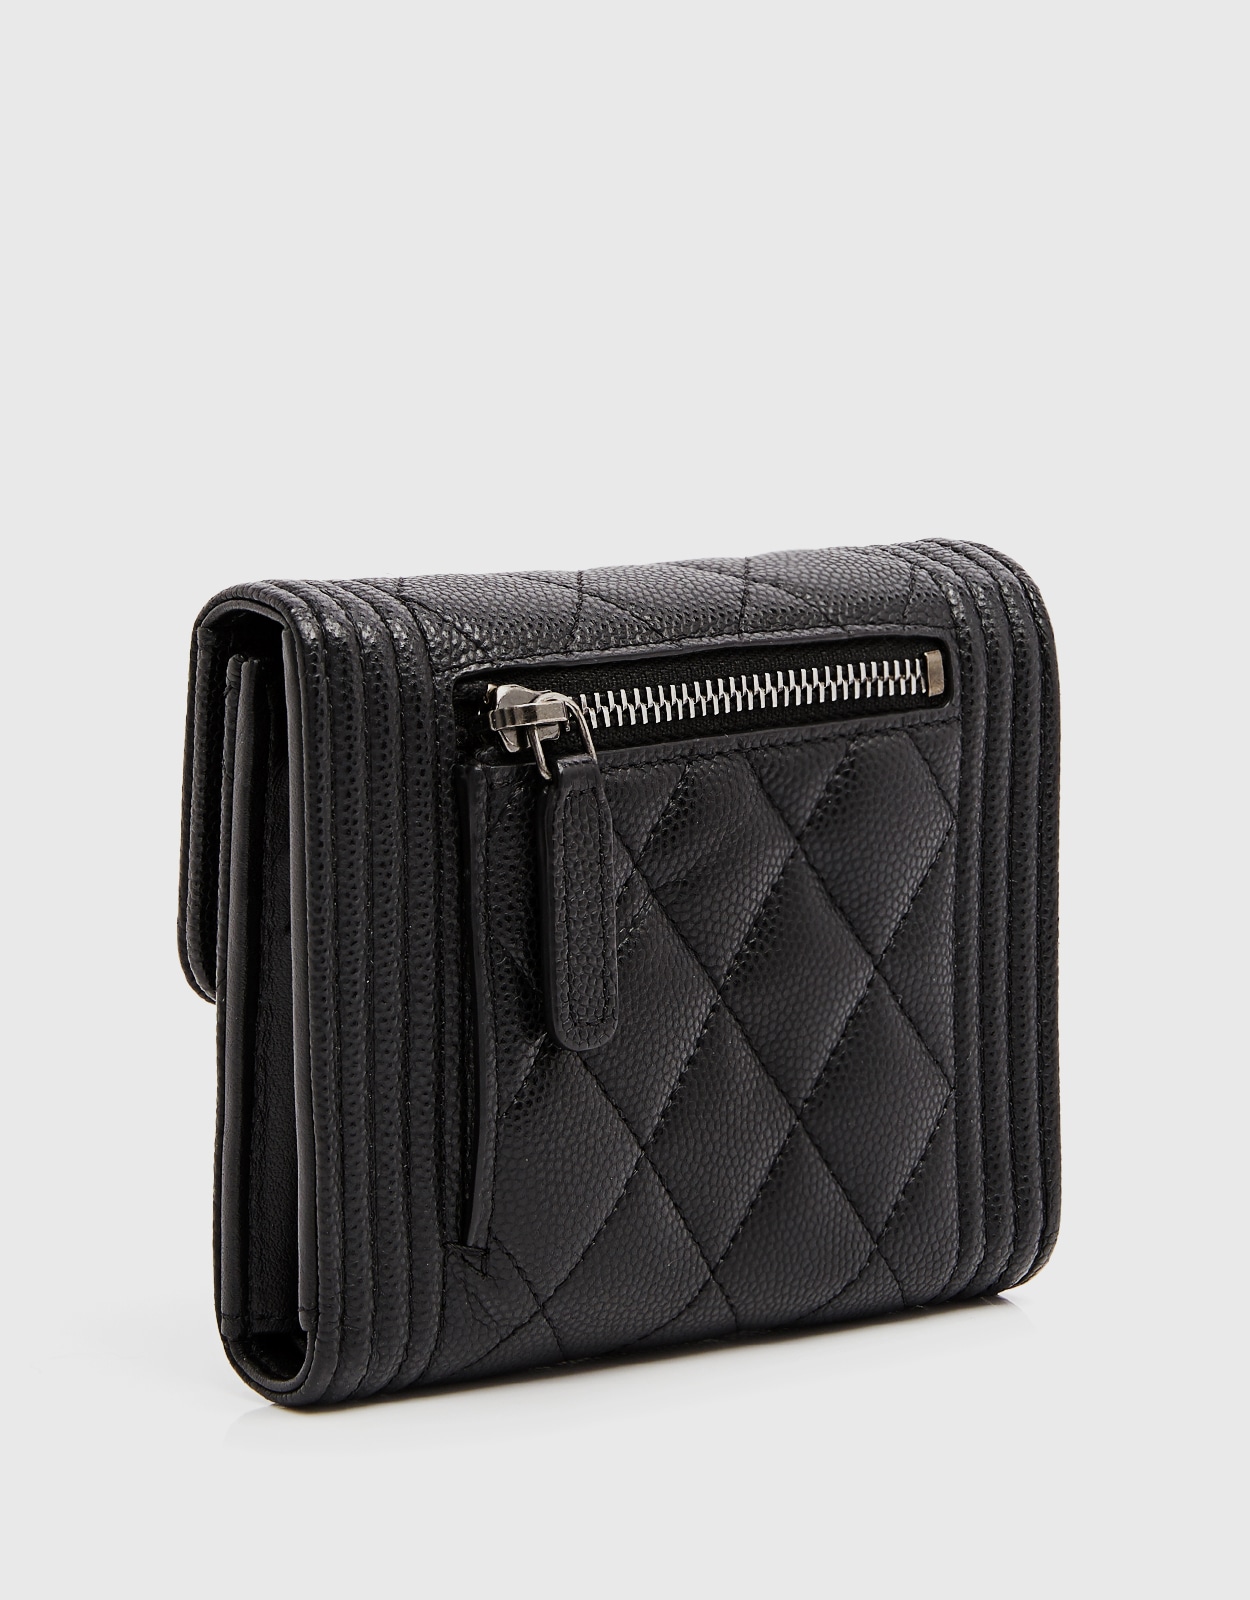 Chanel Chanel Boy Flap Tri-Fold Caviar Wallet (Wallets and Small